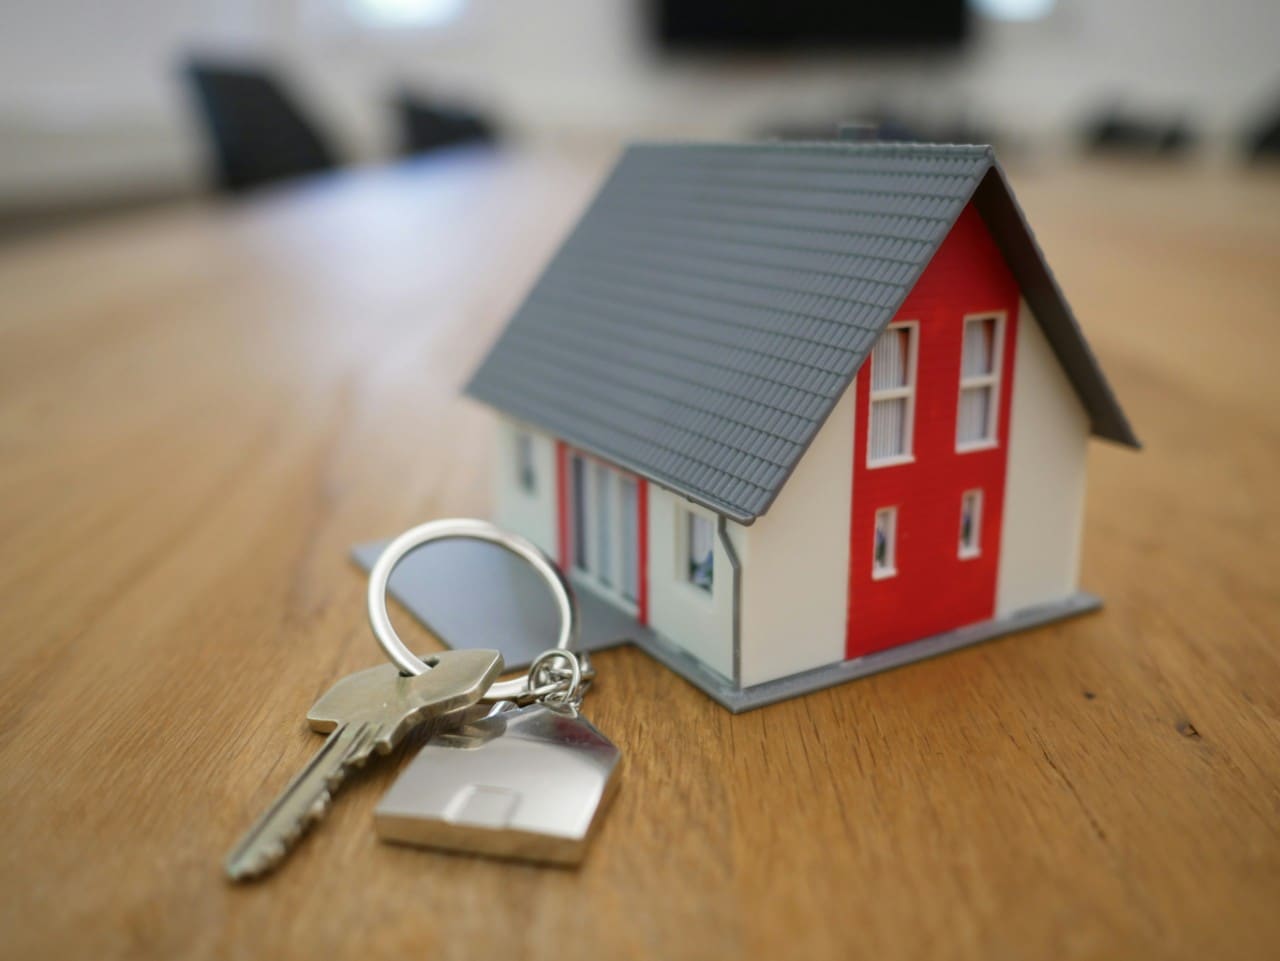 A toy house with keys in front. Image by Tierra Mallorca on Unsplash.